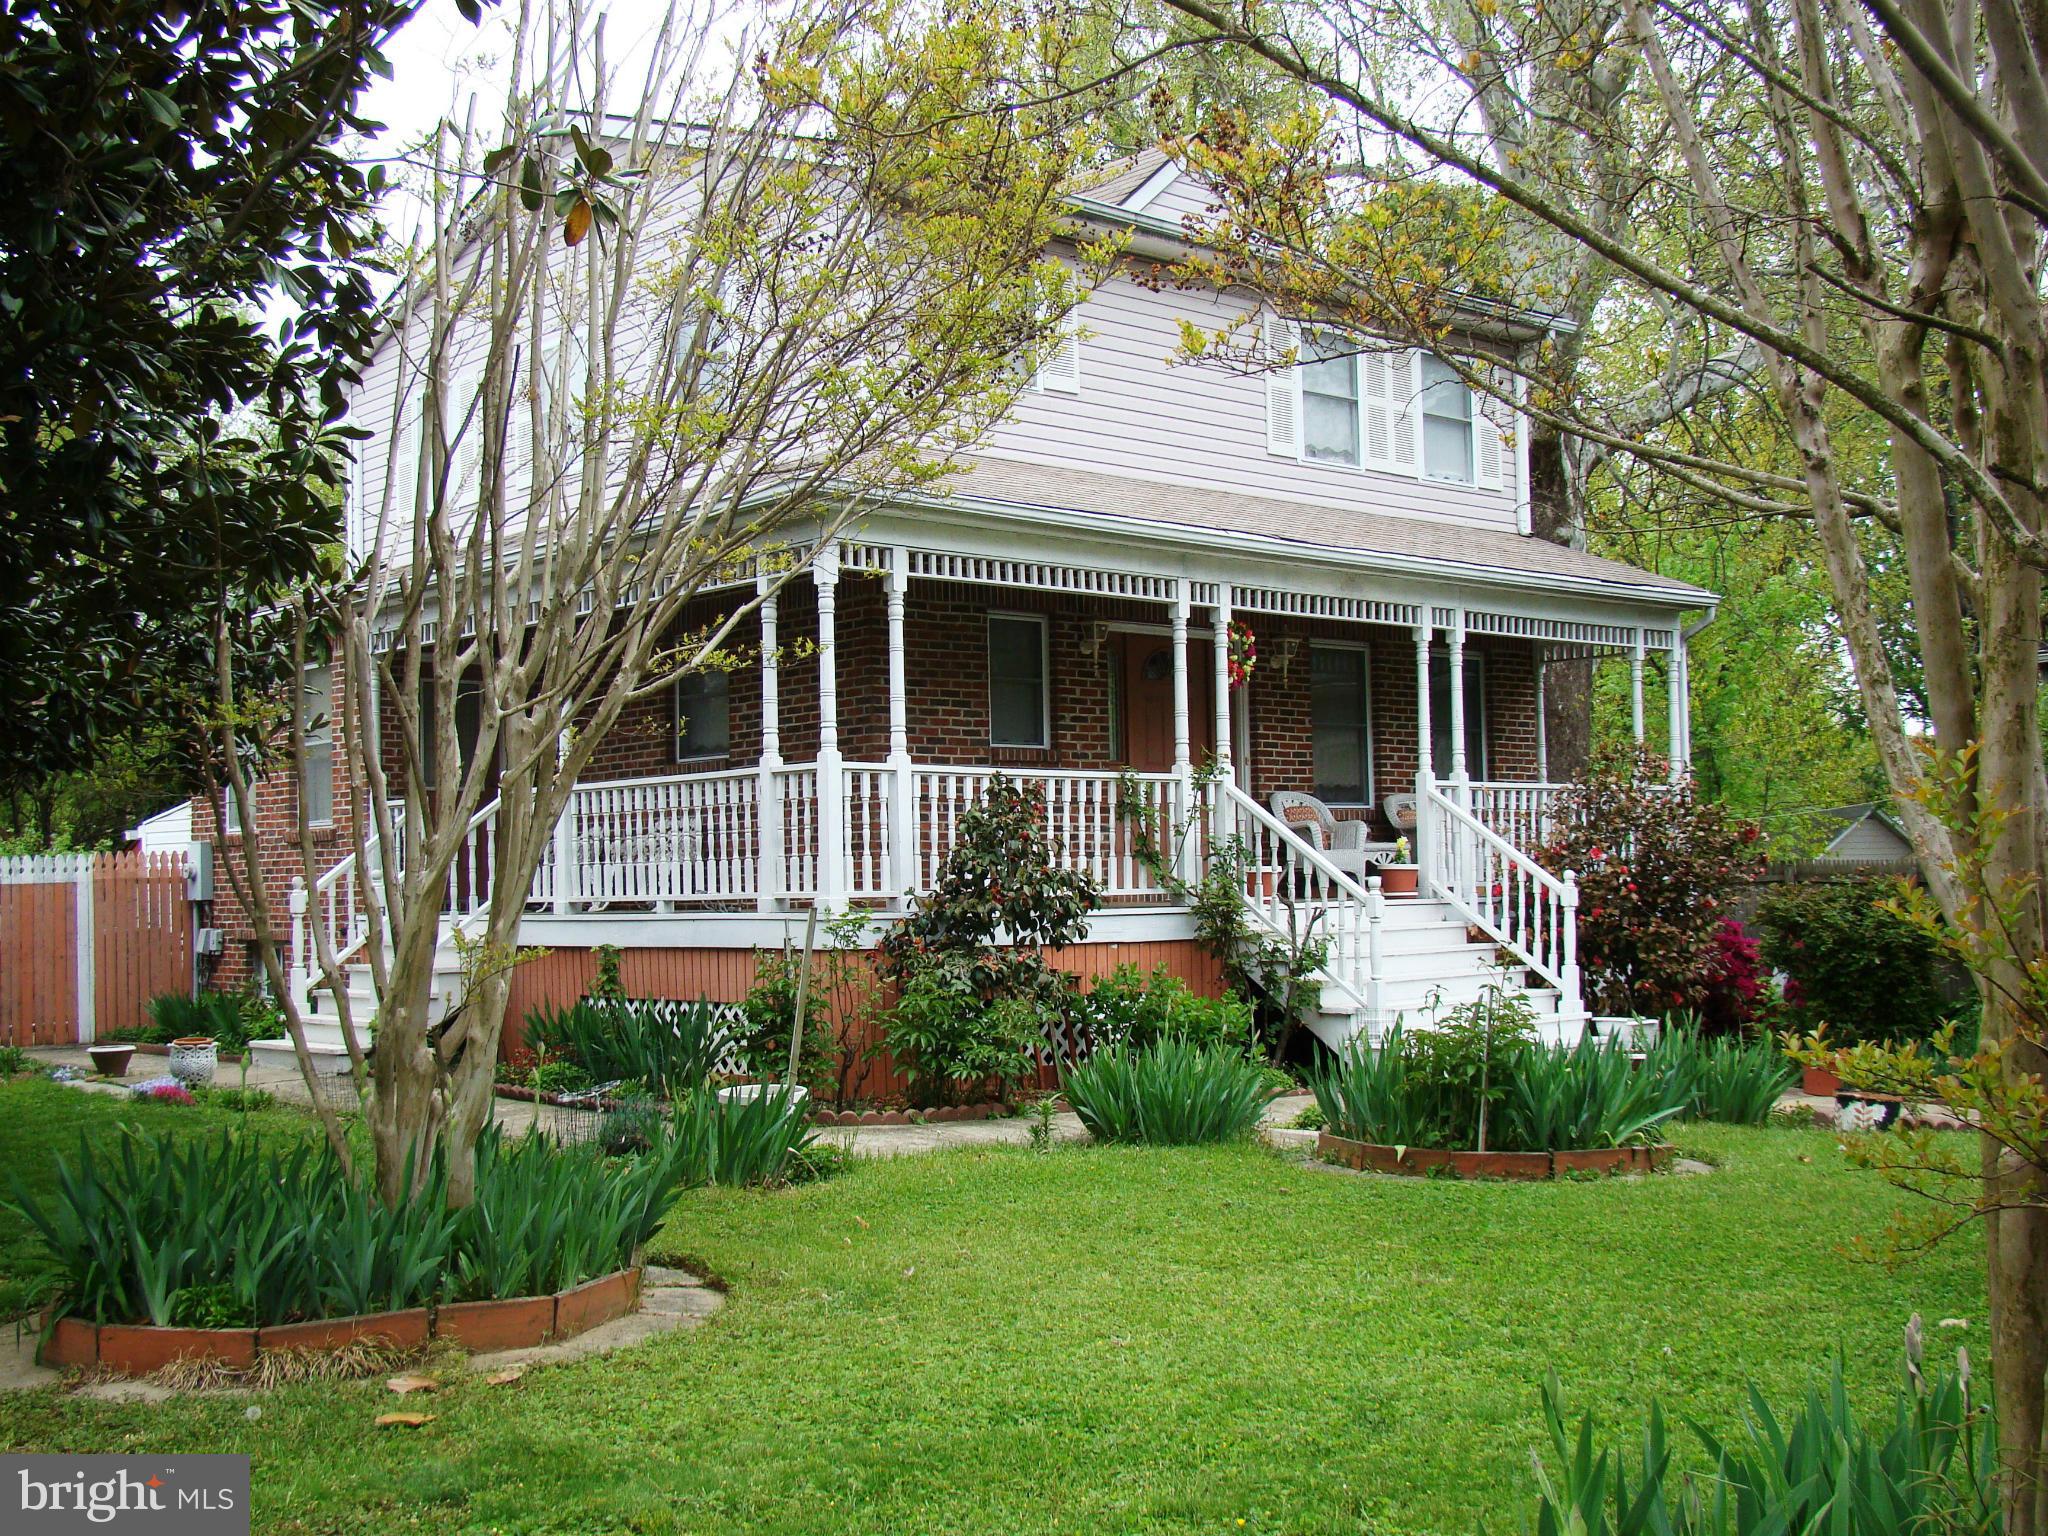 a front view of a house with a yard and potted plants